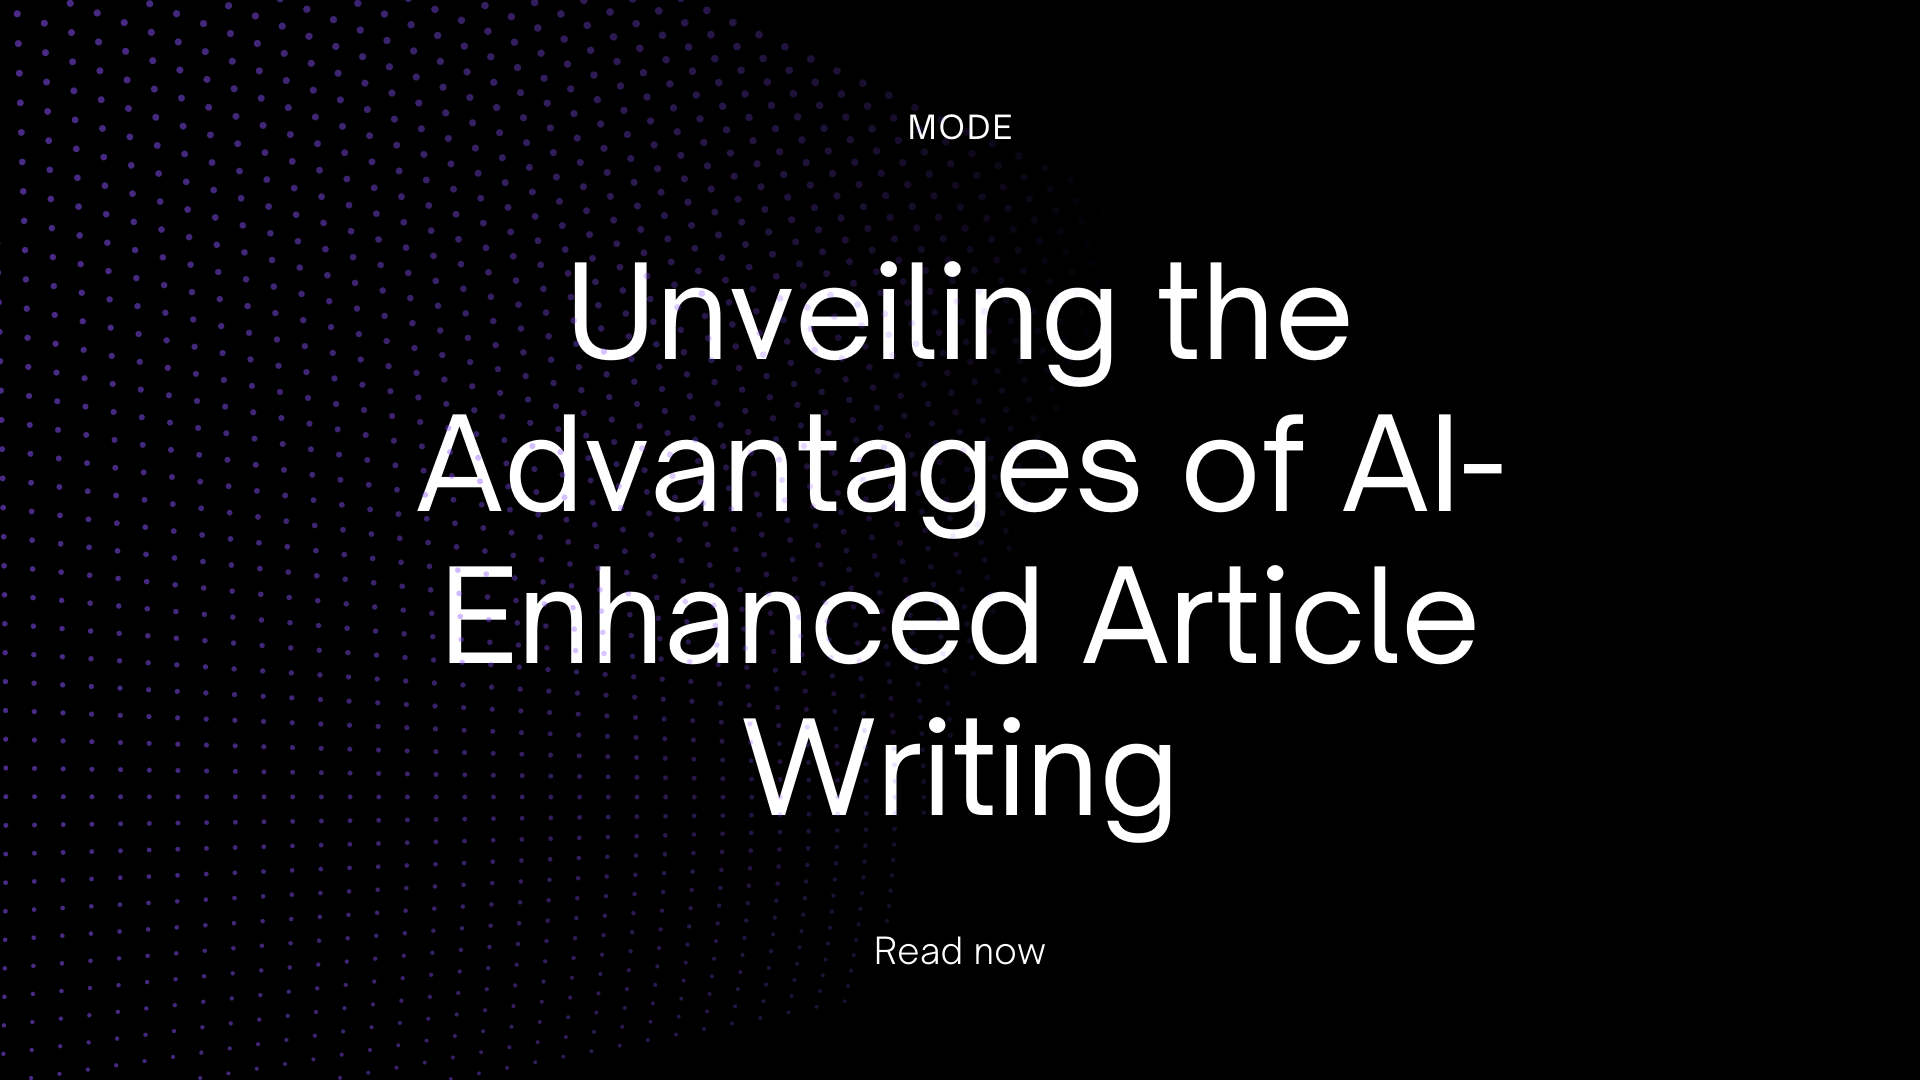 Unveiling the Advantages of AI-Enhanced Article Writing